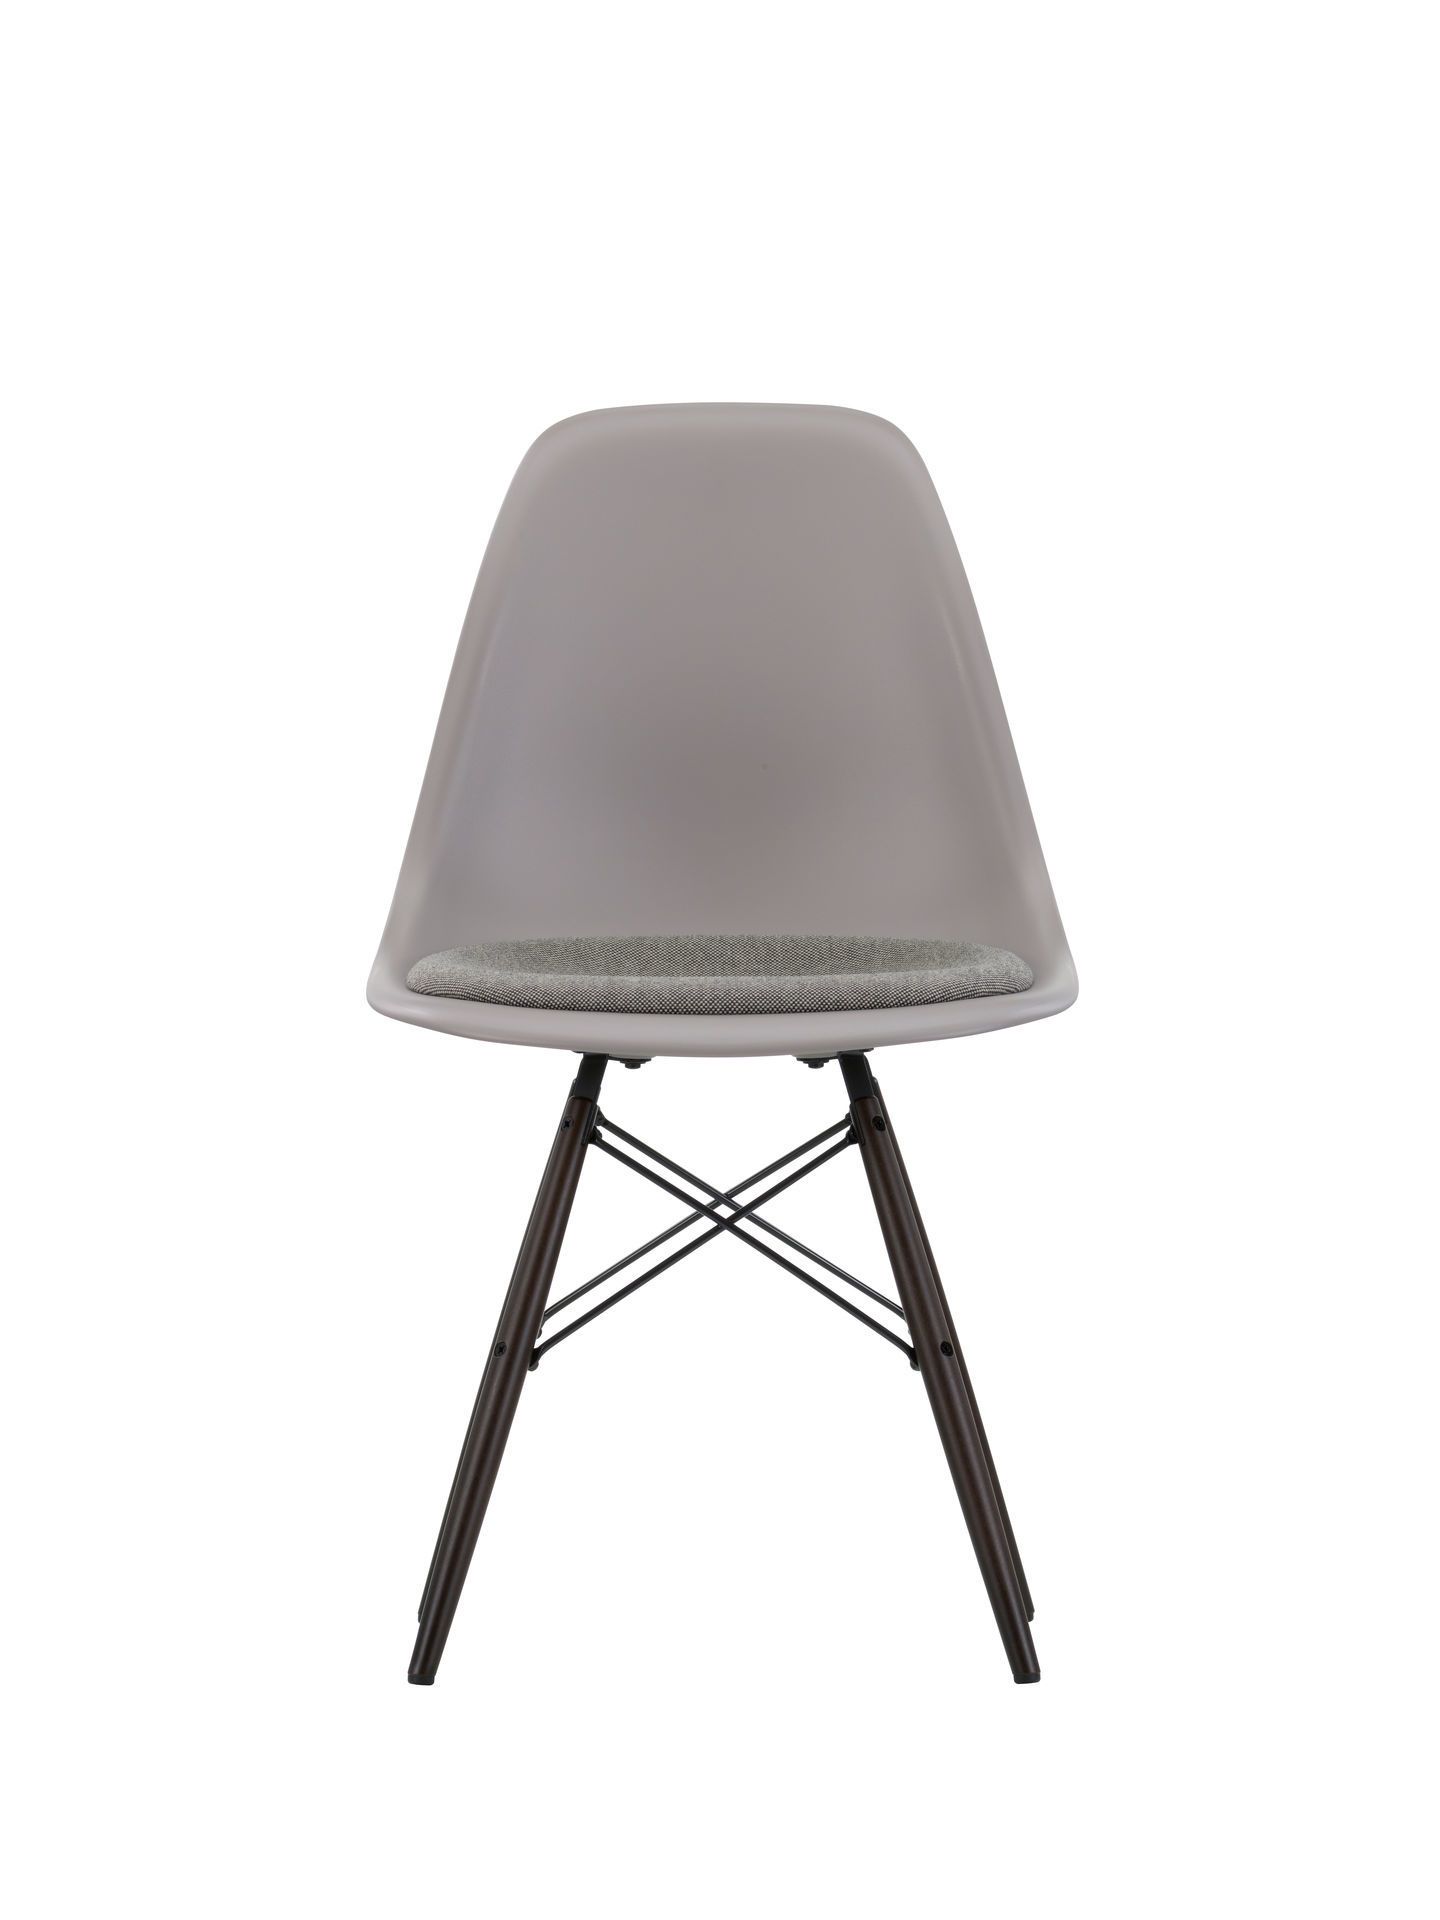 Eames Plastic Side Chair DSW Chair with Seat Cushion Vitra